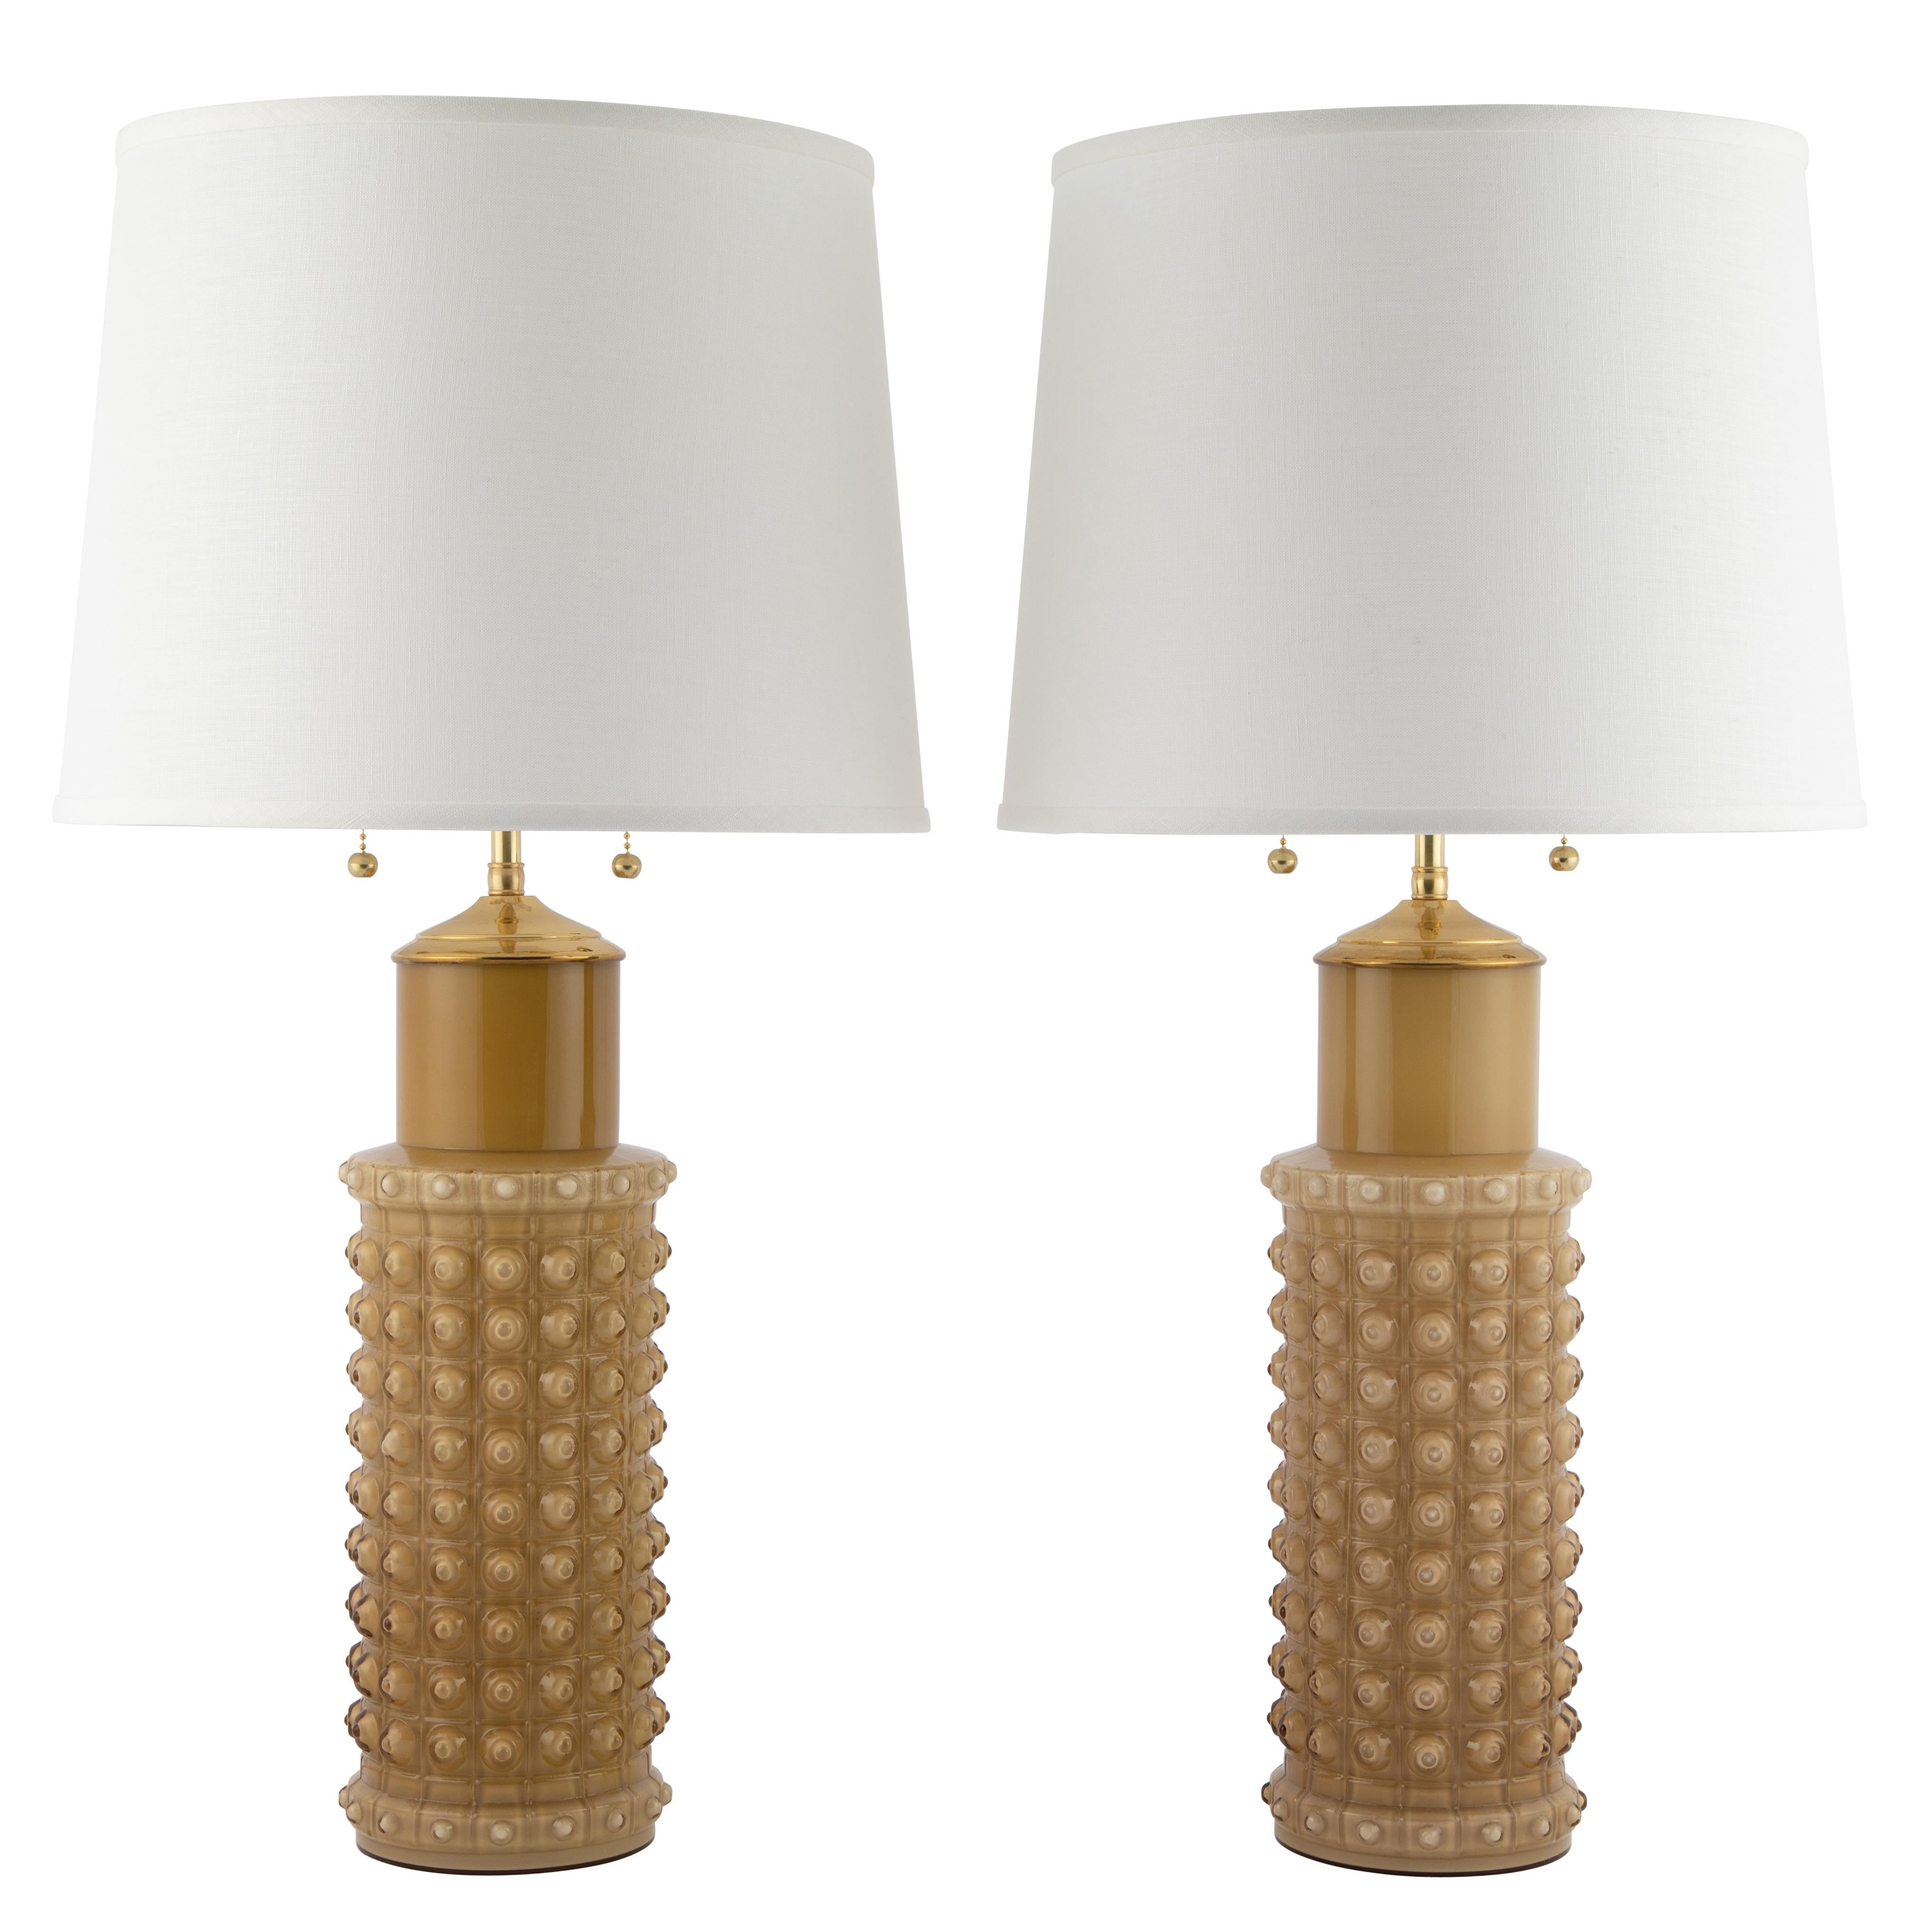 Helena Tynell for Luxus Butterscotch Glass Table Lamps, circa 1960s For Sale